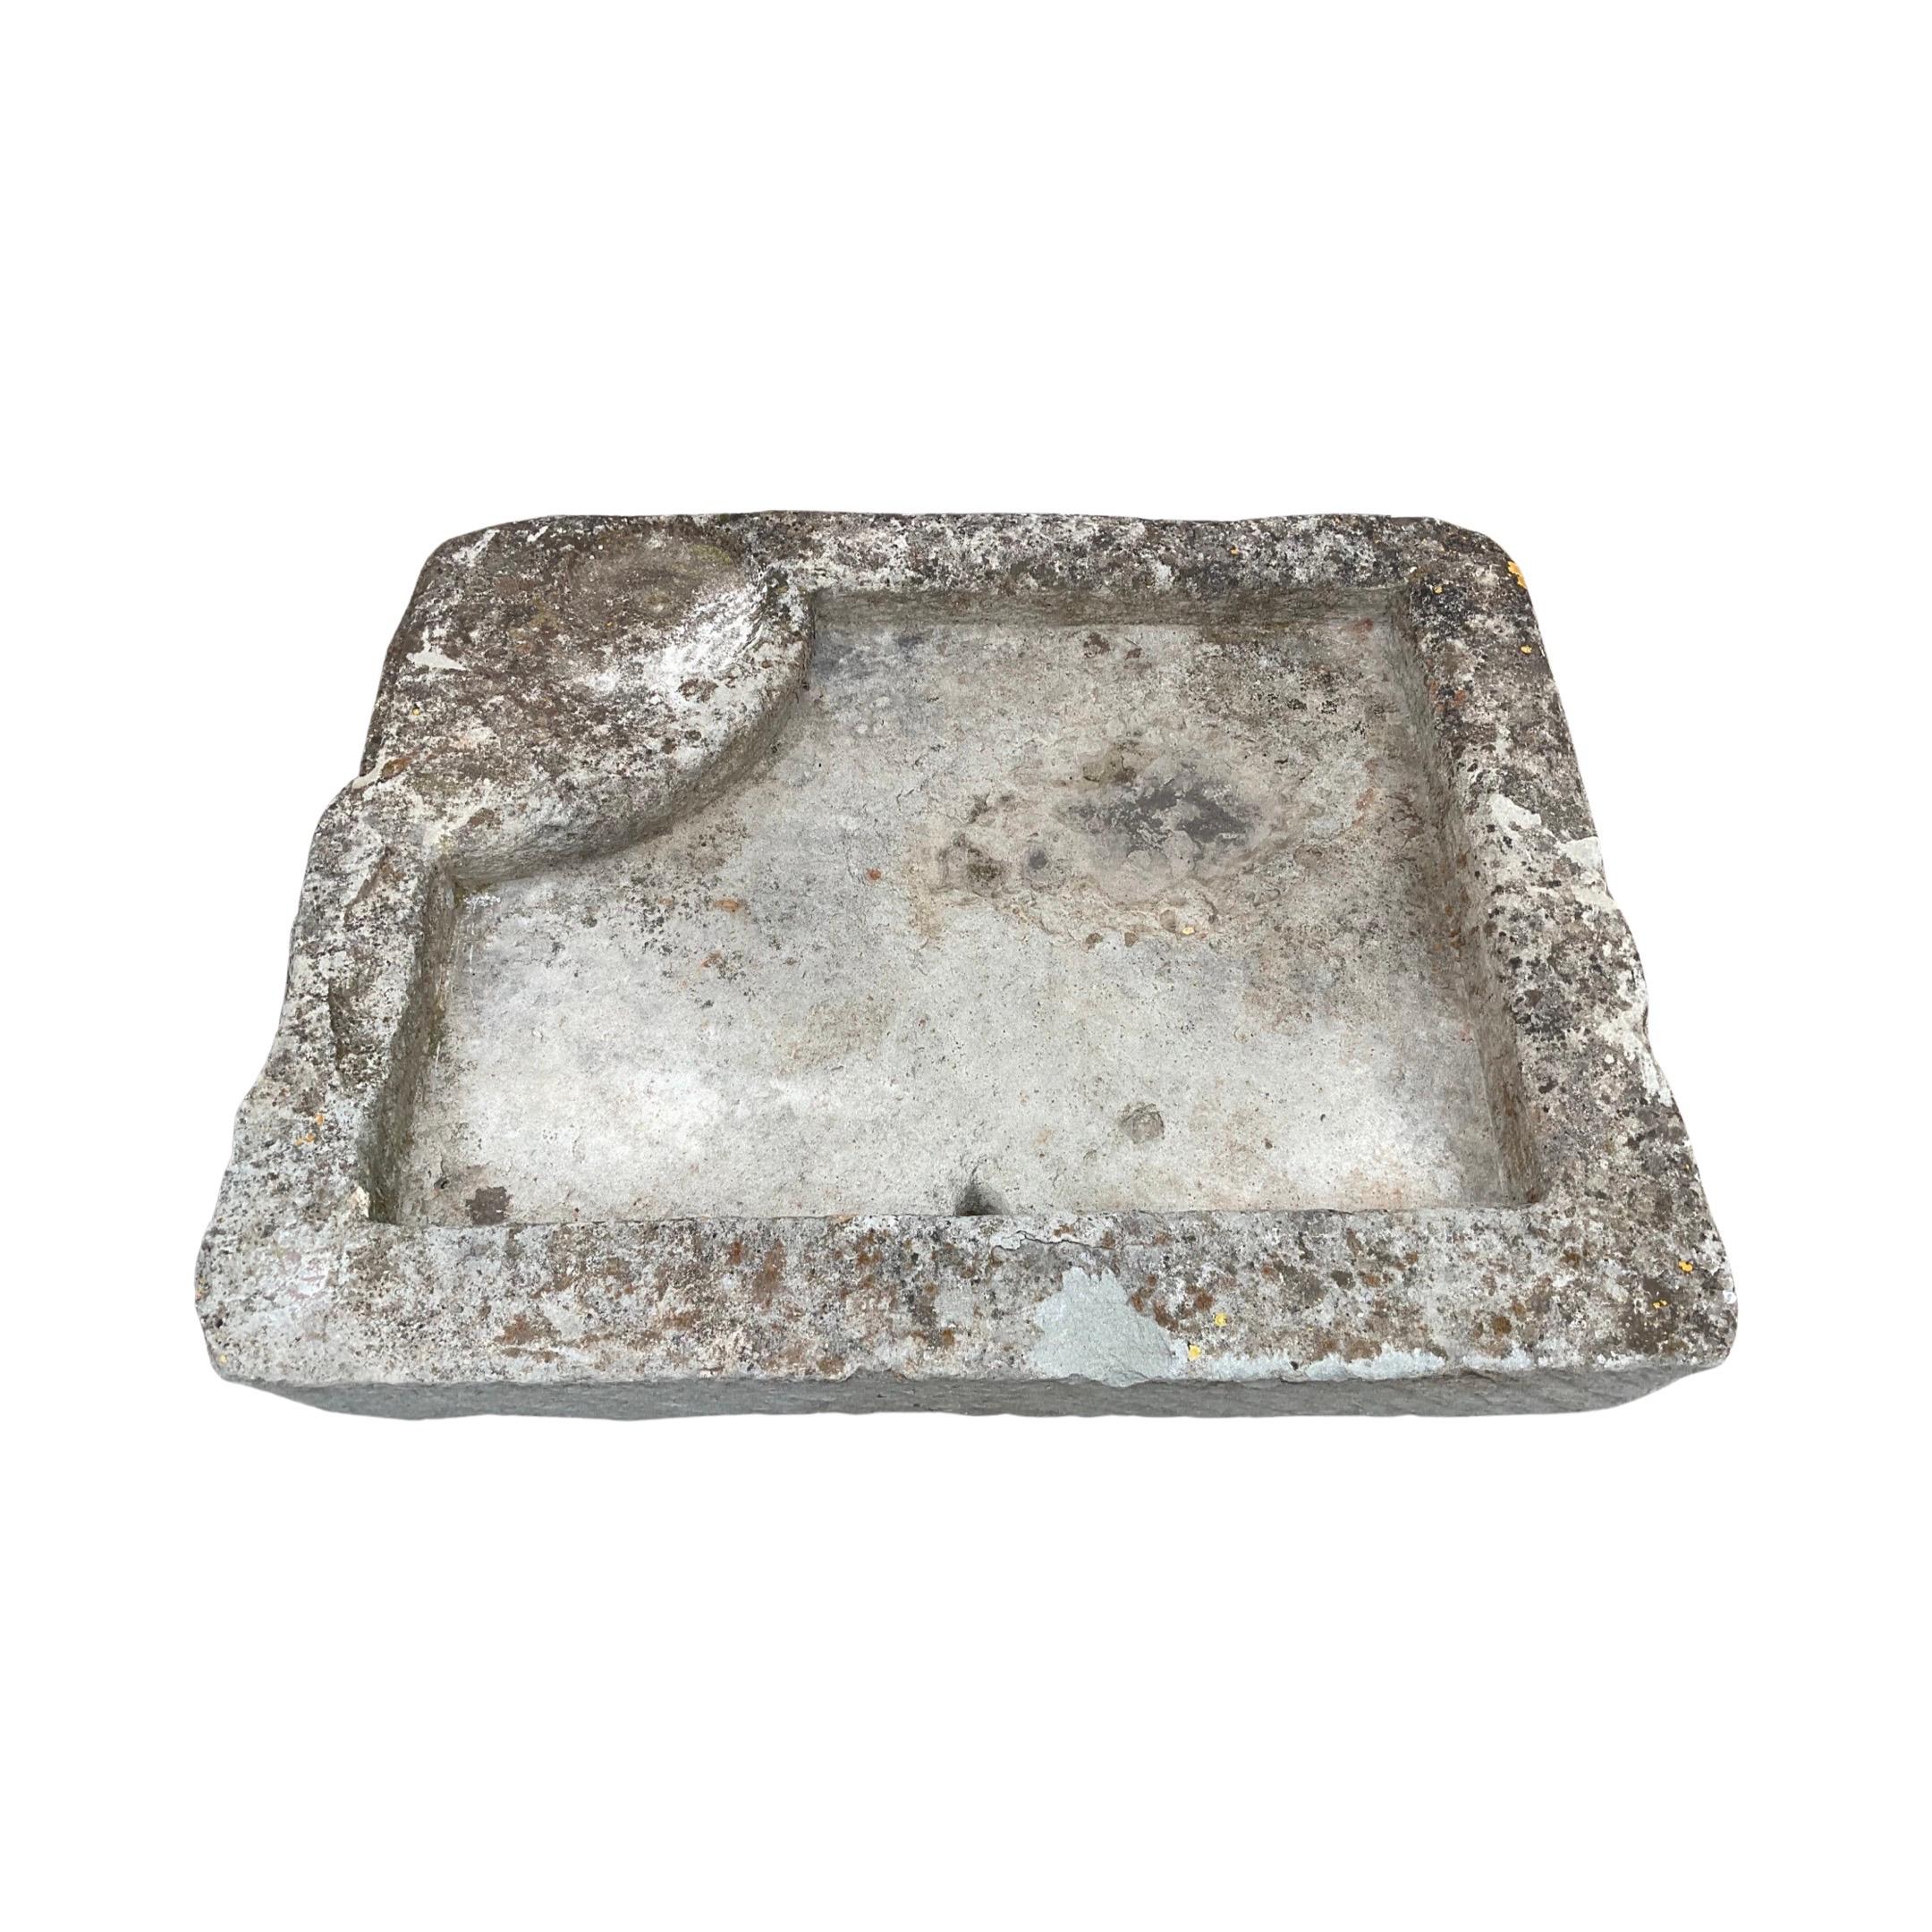 This French Limestone Low-line Trough from the 18th century adds historic charm to any space. Use it as a sink or fountain, with a small base for water overflow. Expertly crafted in France, its low-line style and premium limestone construction make